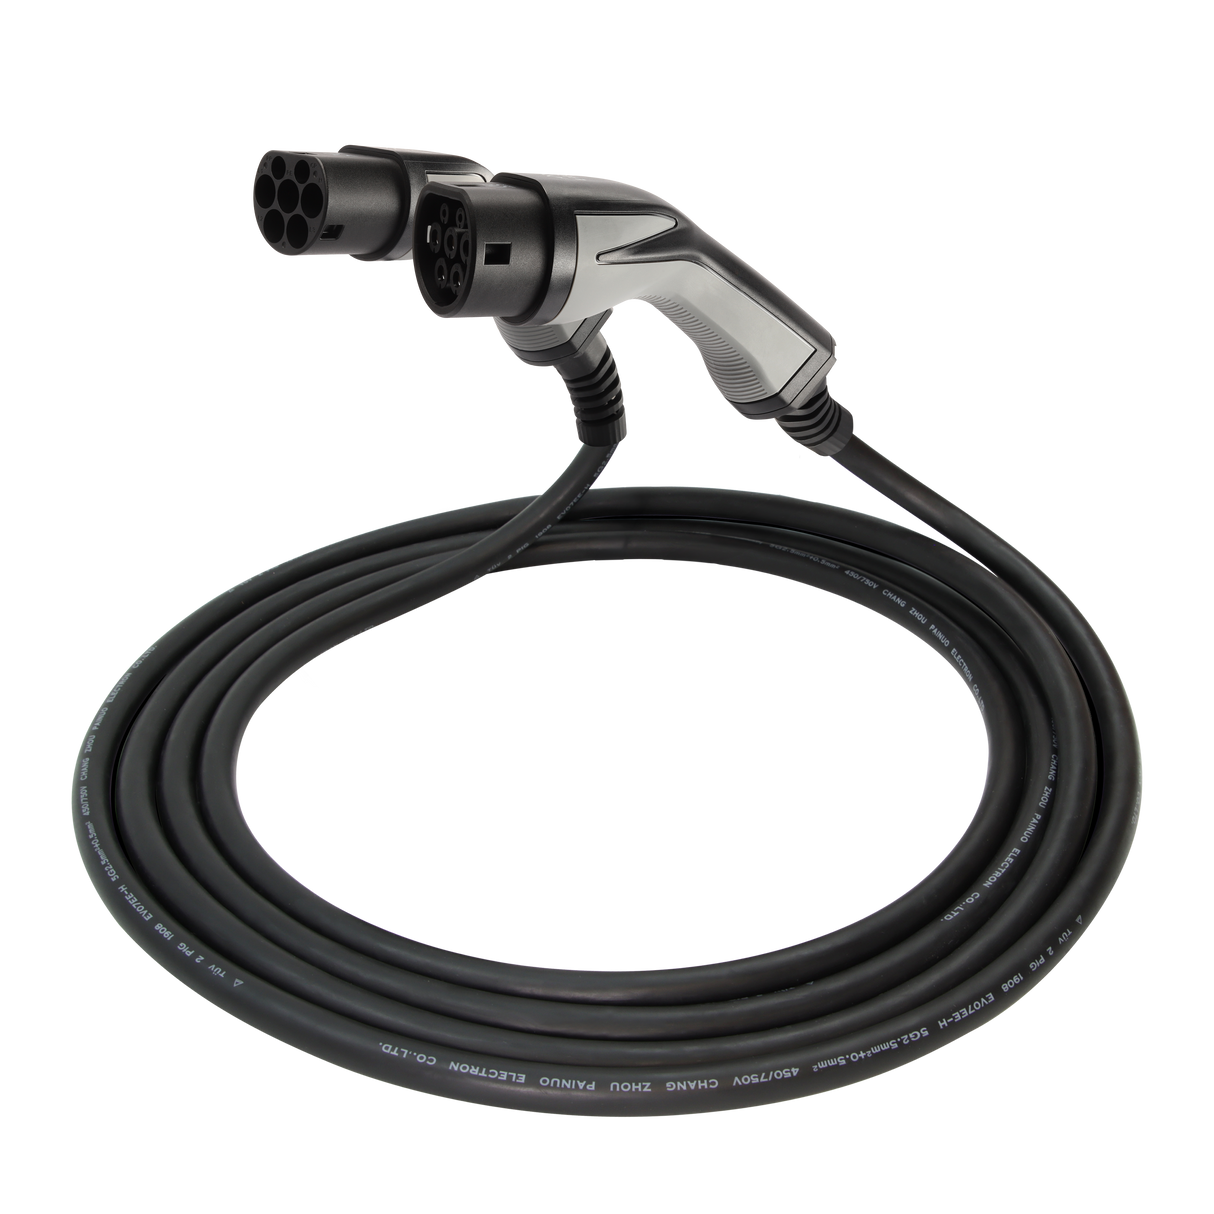 Charging cable Renault Twingo - Erock Pro Type 2 - 32A 3 phase (22 kW)